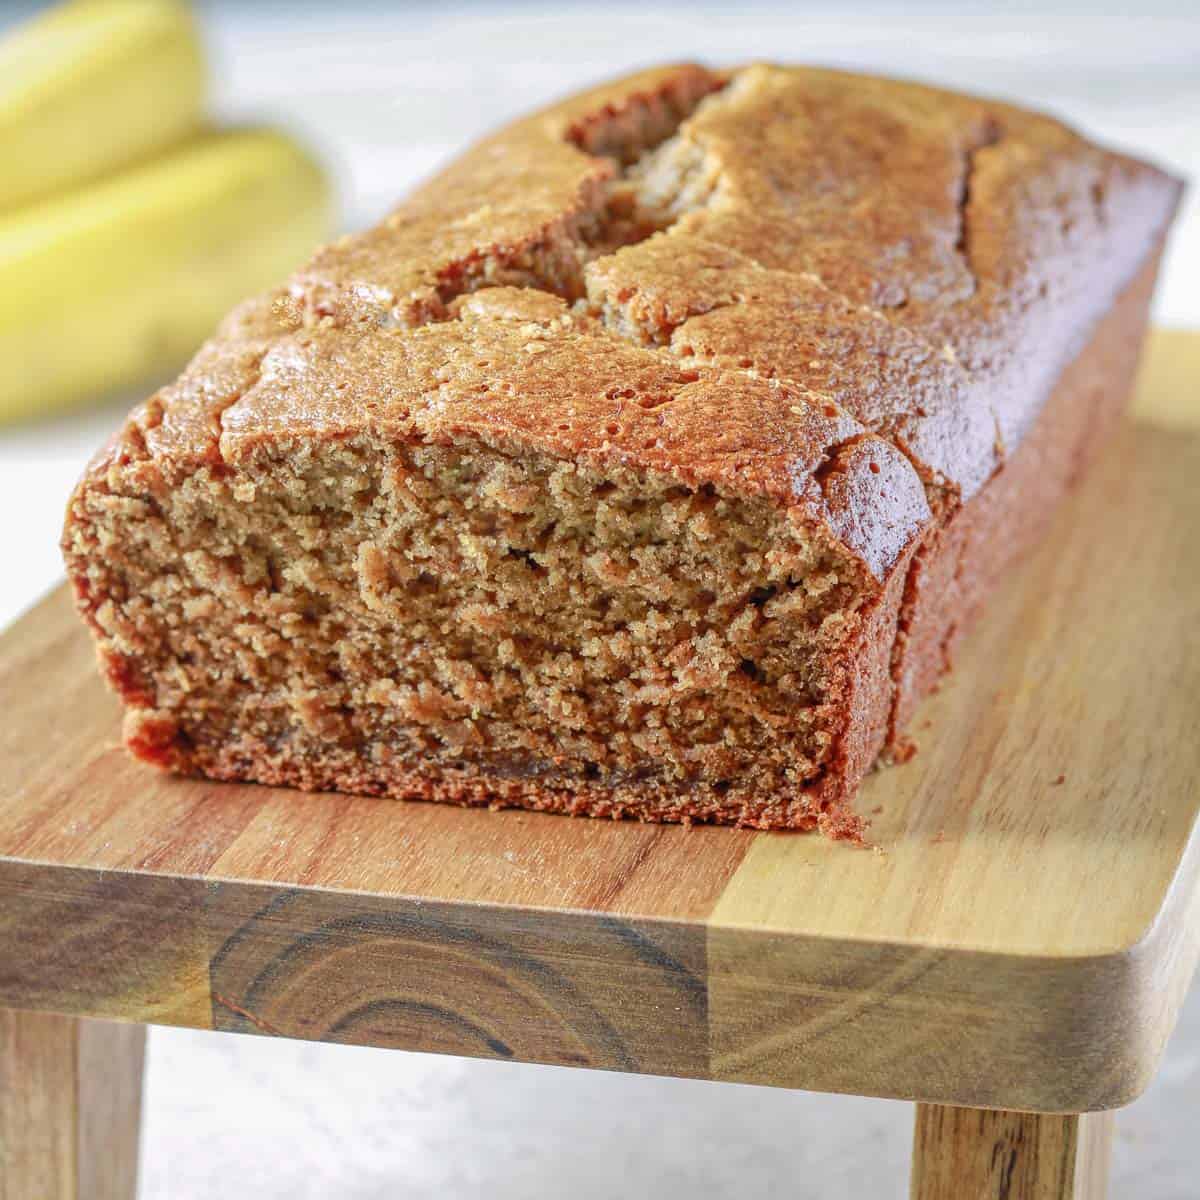 the inside of a loaf of banana bread